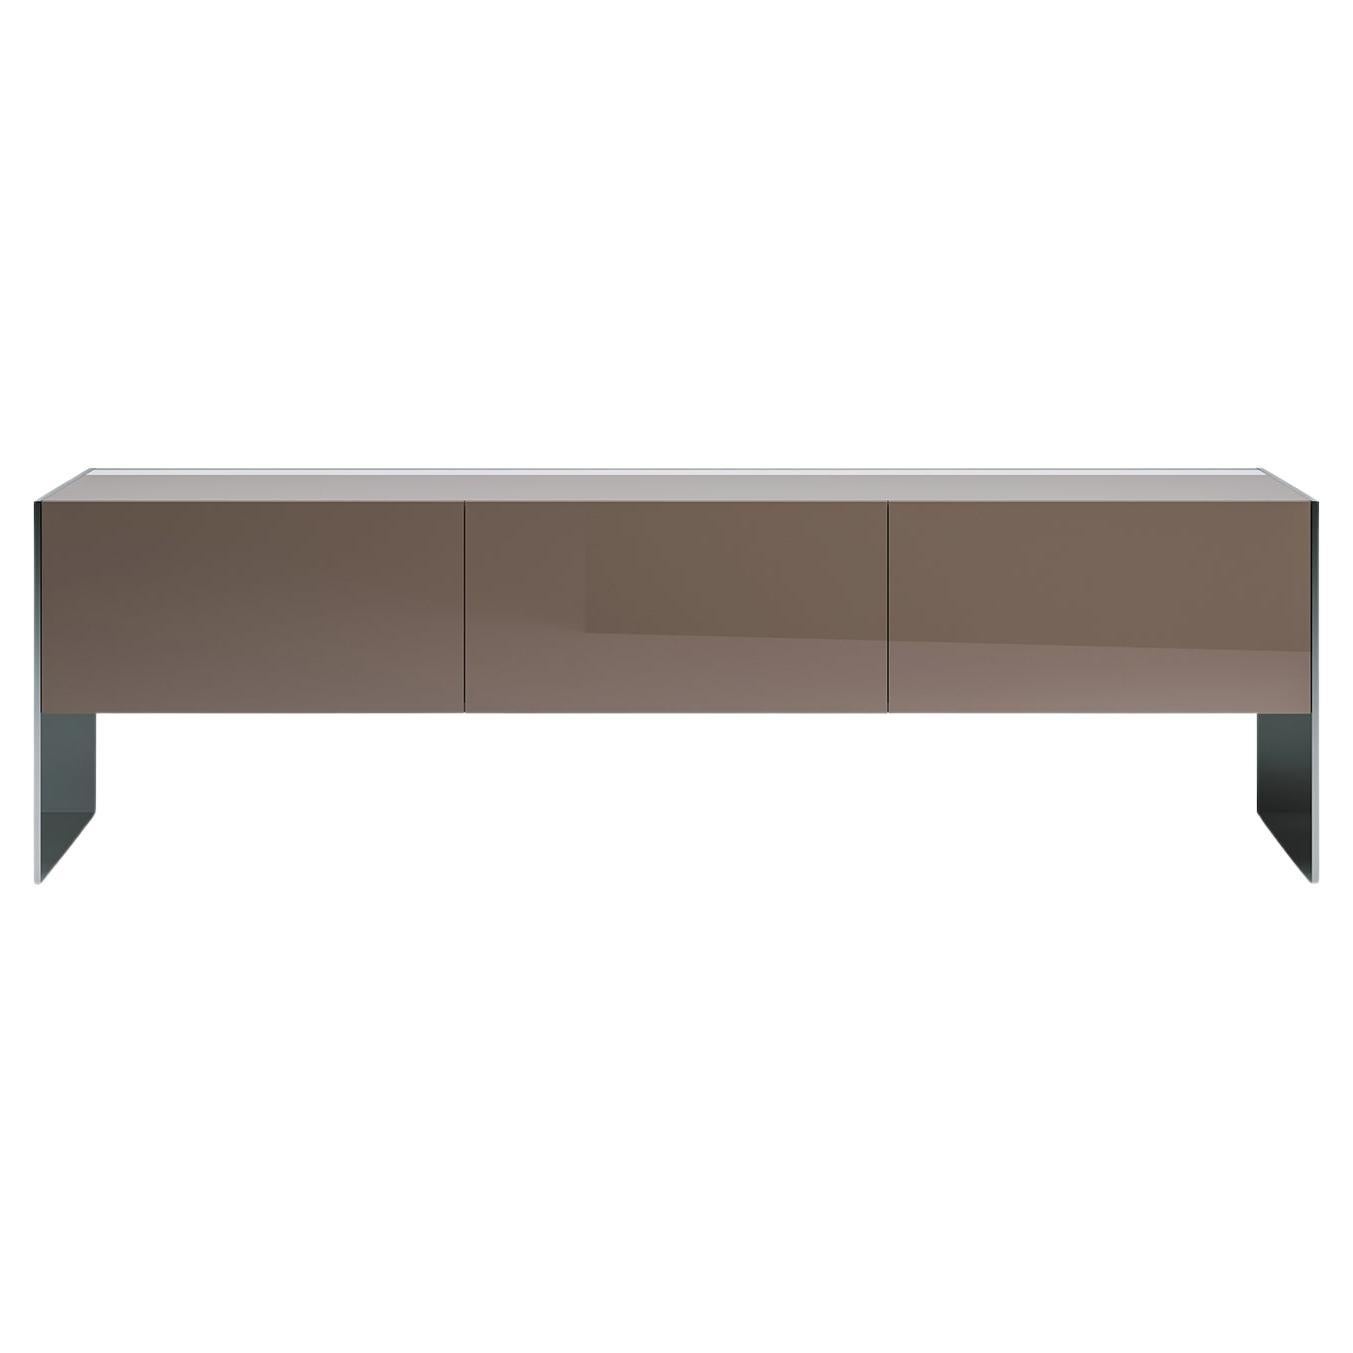 Acerbis Steel Sideboard in Glossy Lacquered Clay Top & Doors with Steel Sides For Sale